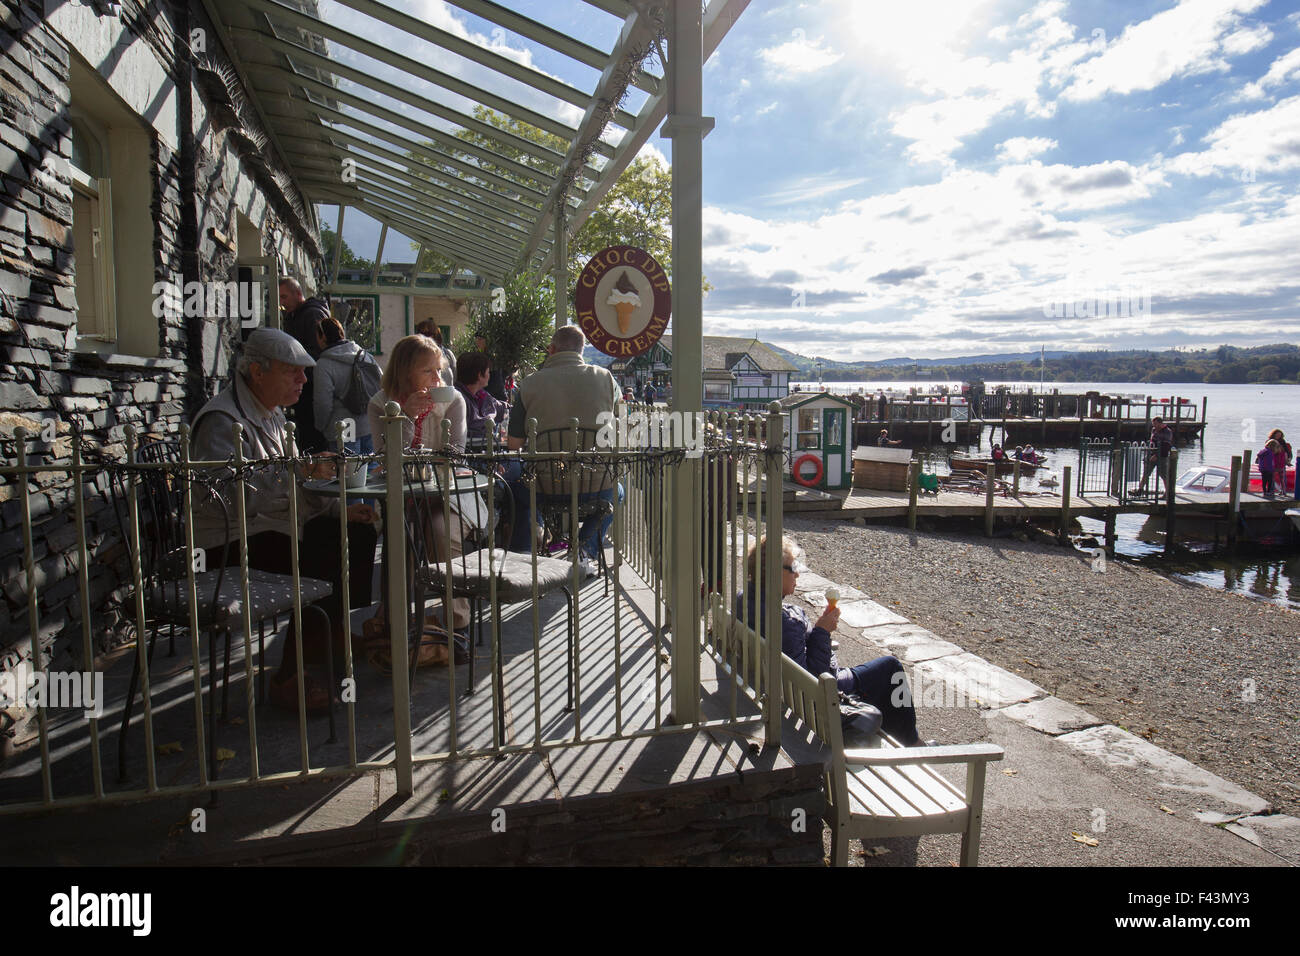 Lake Windermere Cumbria UK Wednesday  14th October 2015,  Sunny  afternoon  at Waterhead at the northern end of Lake Windermere .Showing autumnal colours  Afresco teas & ice cream at lakeside cafe  Credit:  Gordon Shoosmith/Alamy Live News Stock Photo